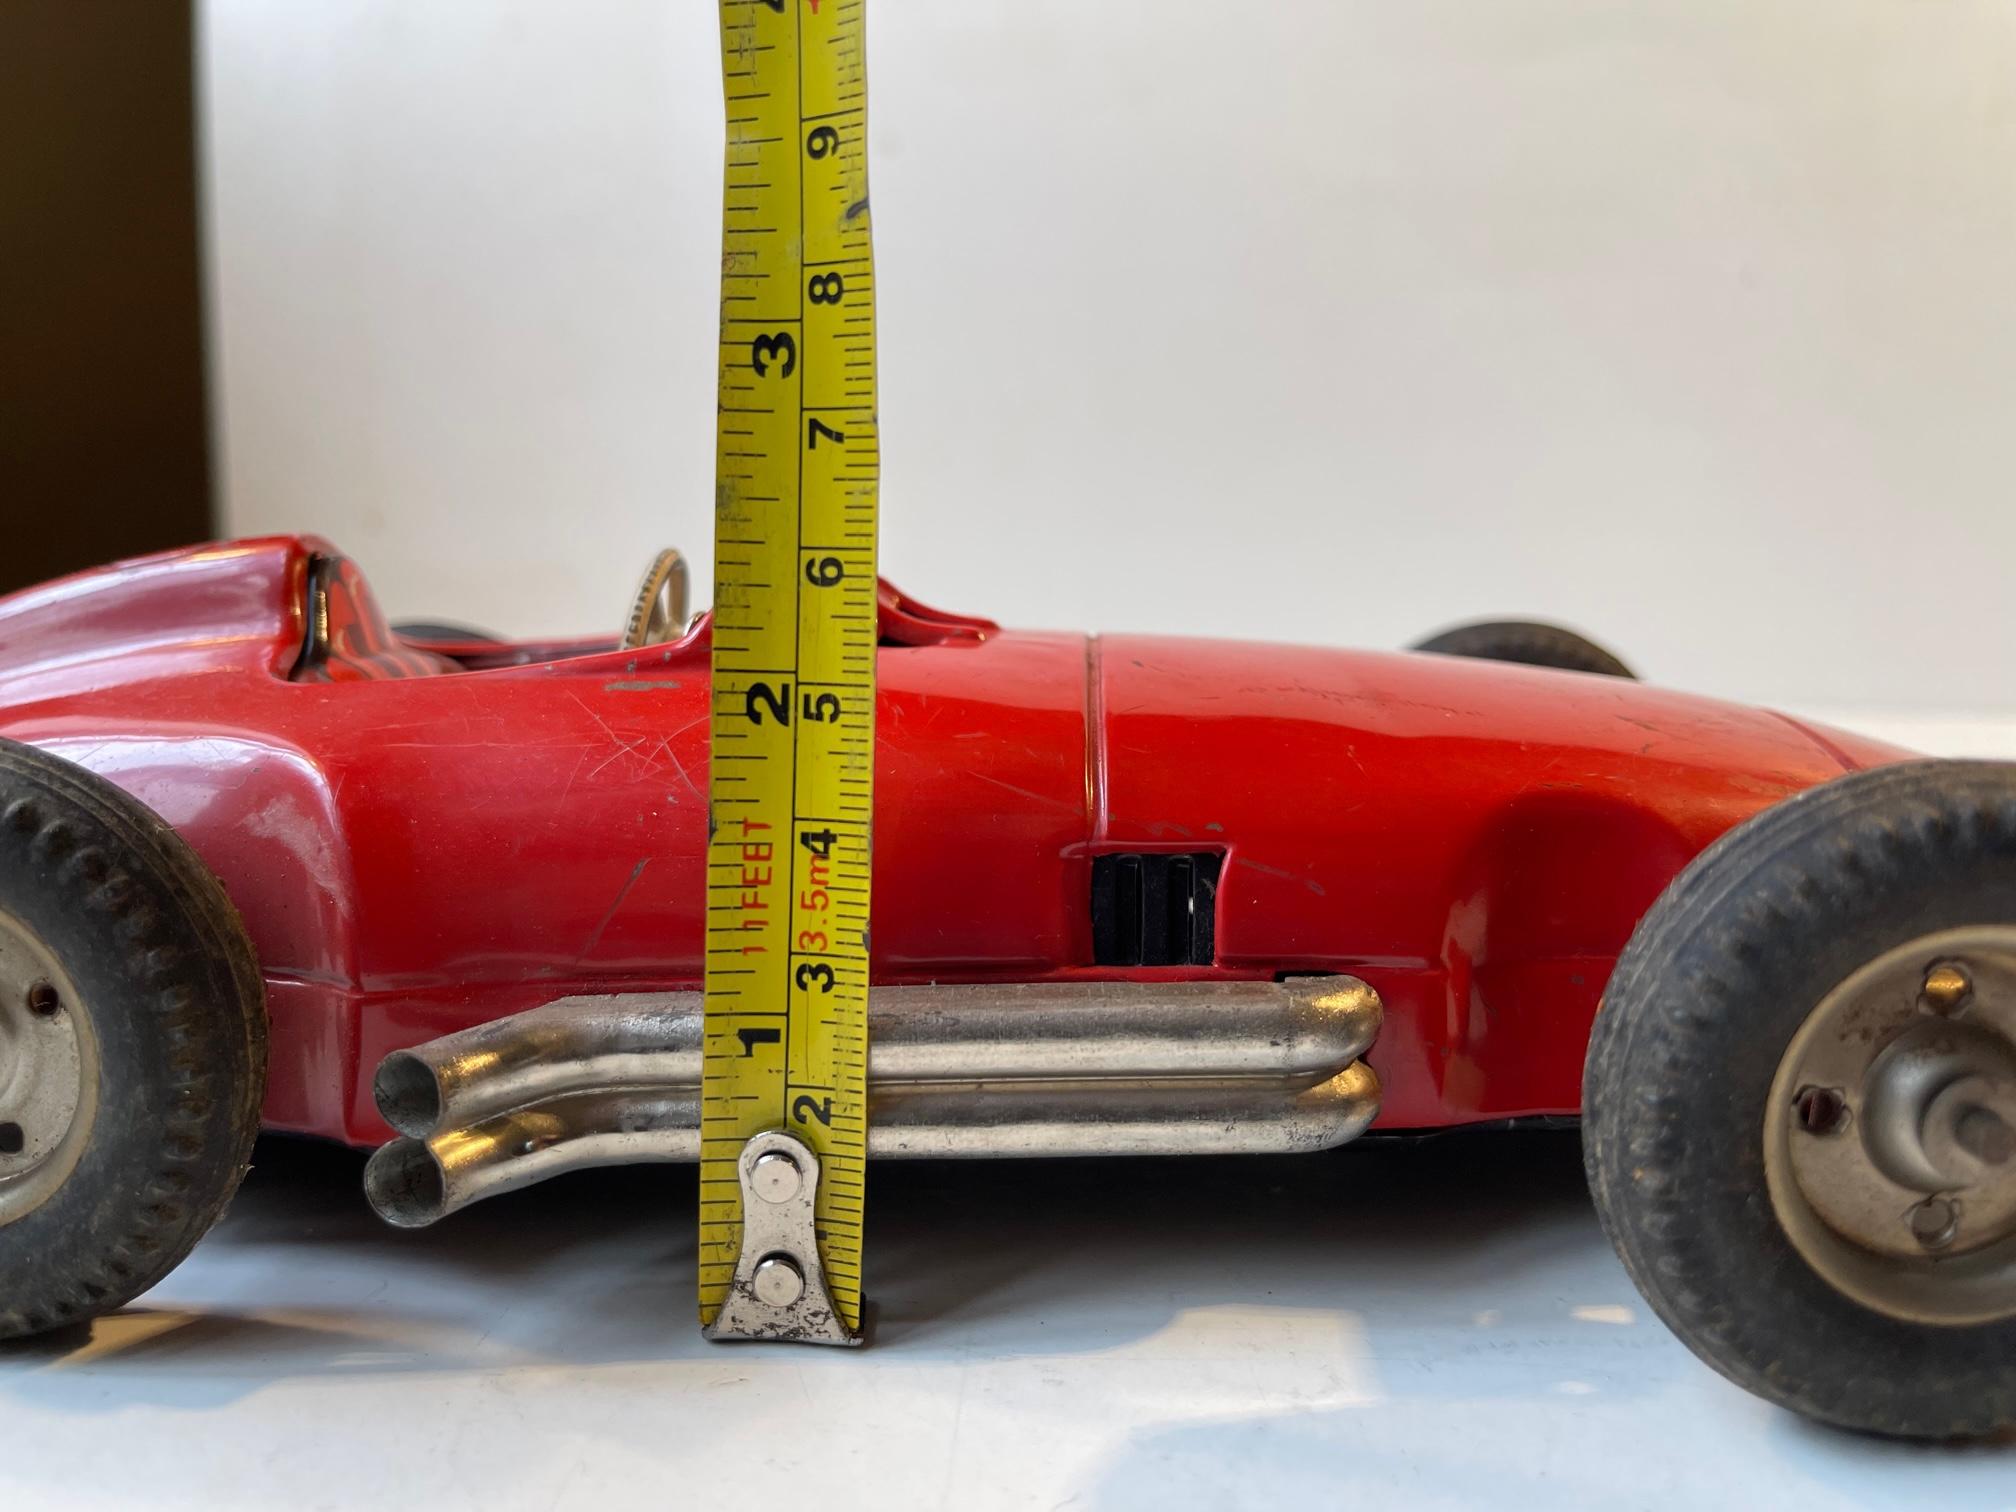 Vintage Tin Toy Mercedes-Benz W-196 Racing Car by Jnf, Western Germany, 1950s 4